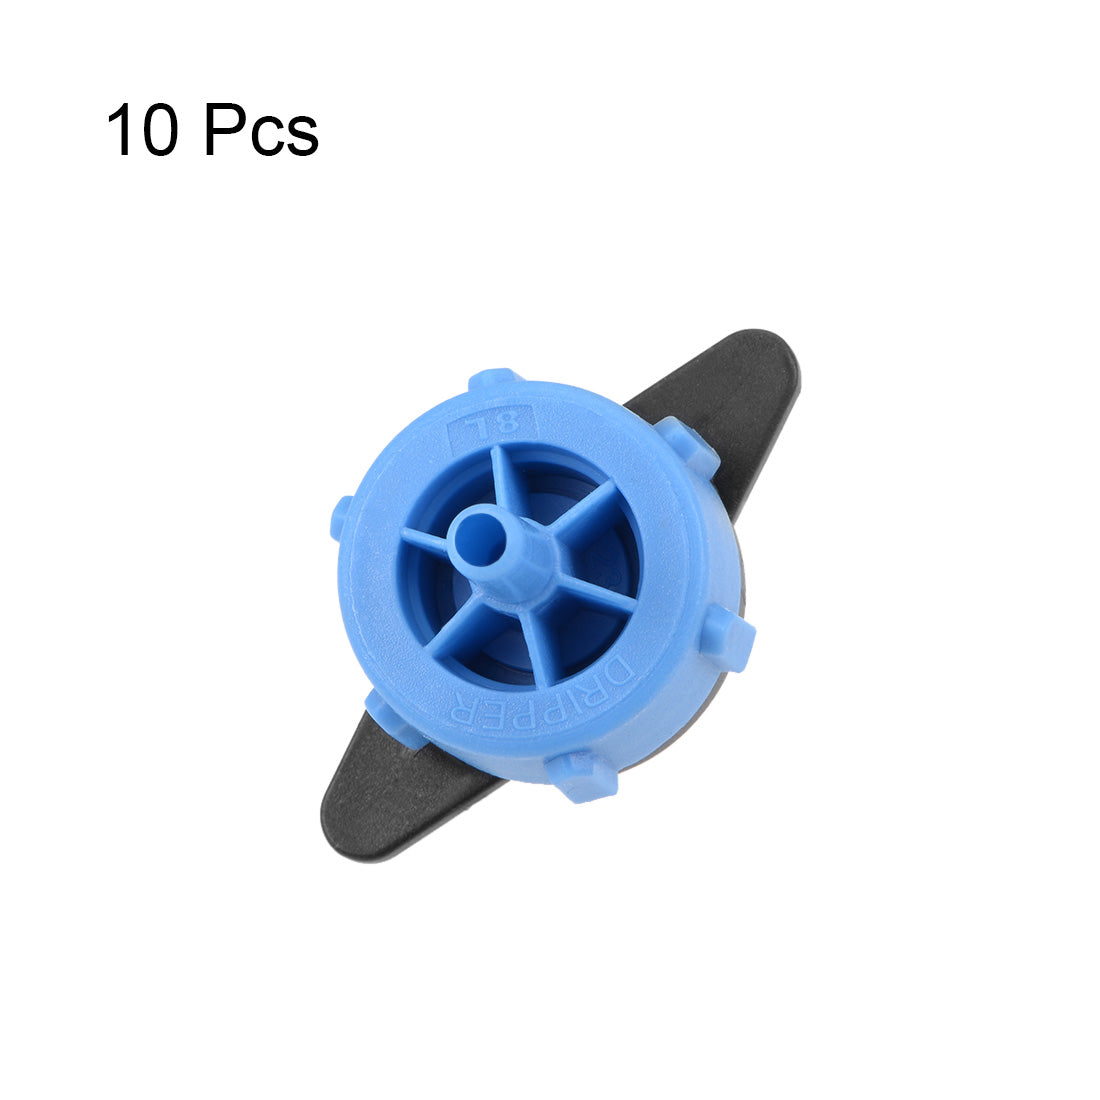 uxcell Uxcell Pressure Compensating Dripper 2GPH 8L/H Emitter for Garden Lawn Drip Irrigation with Barbed Hose Connector Plastic Black Blue 10pcs